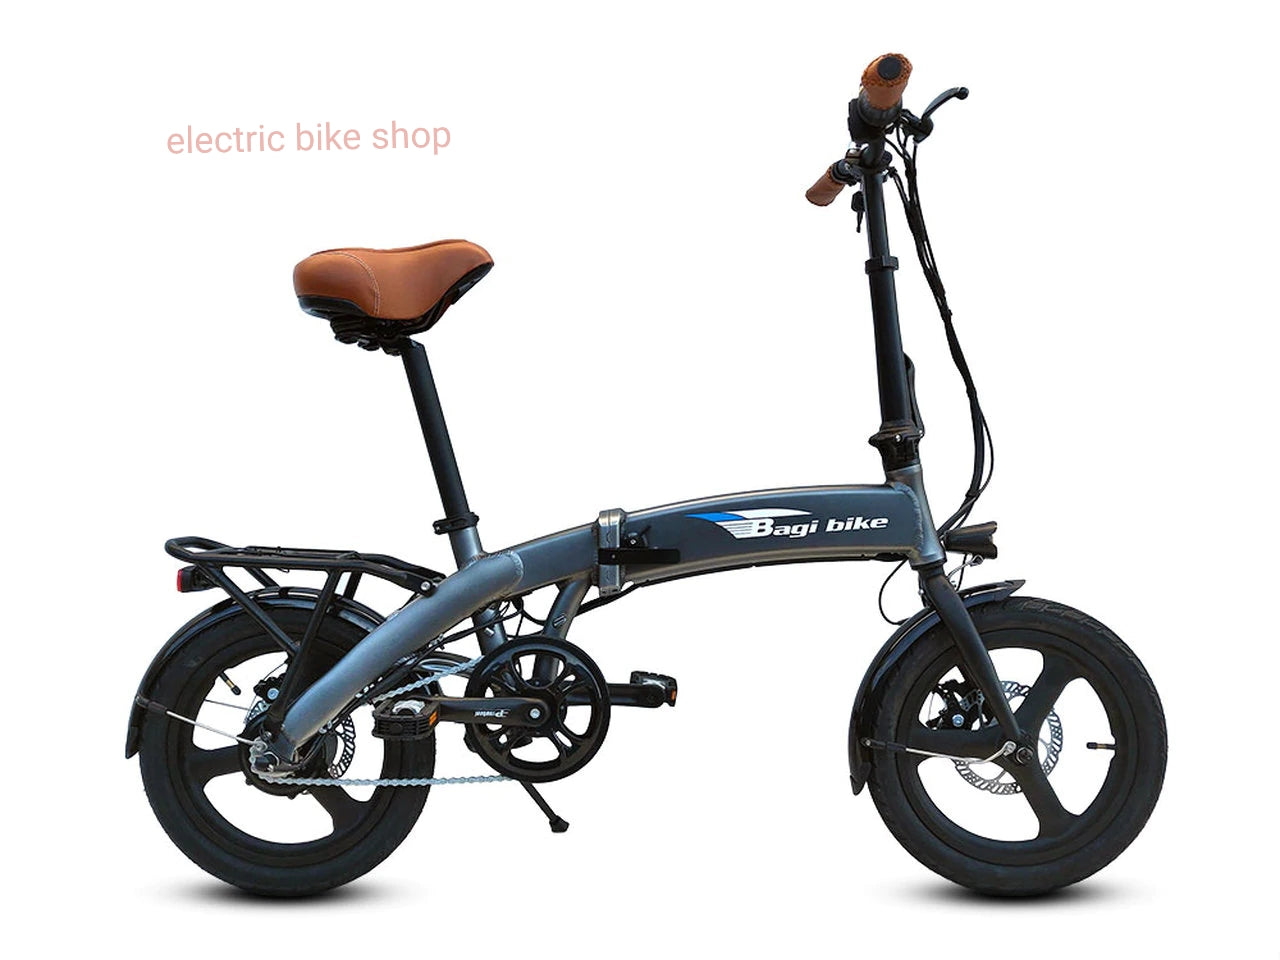 the lightest electric bike